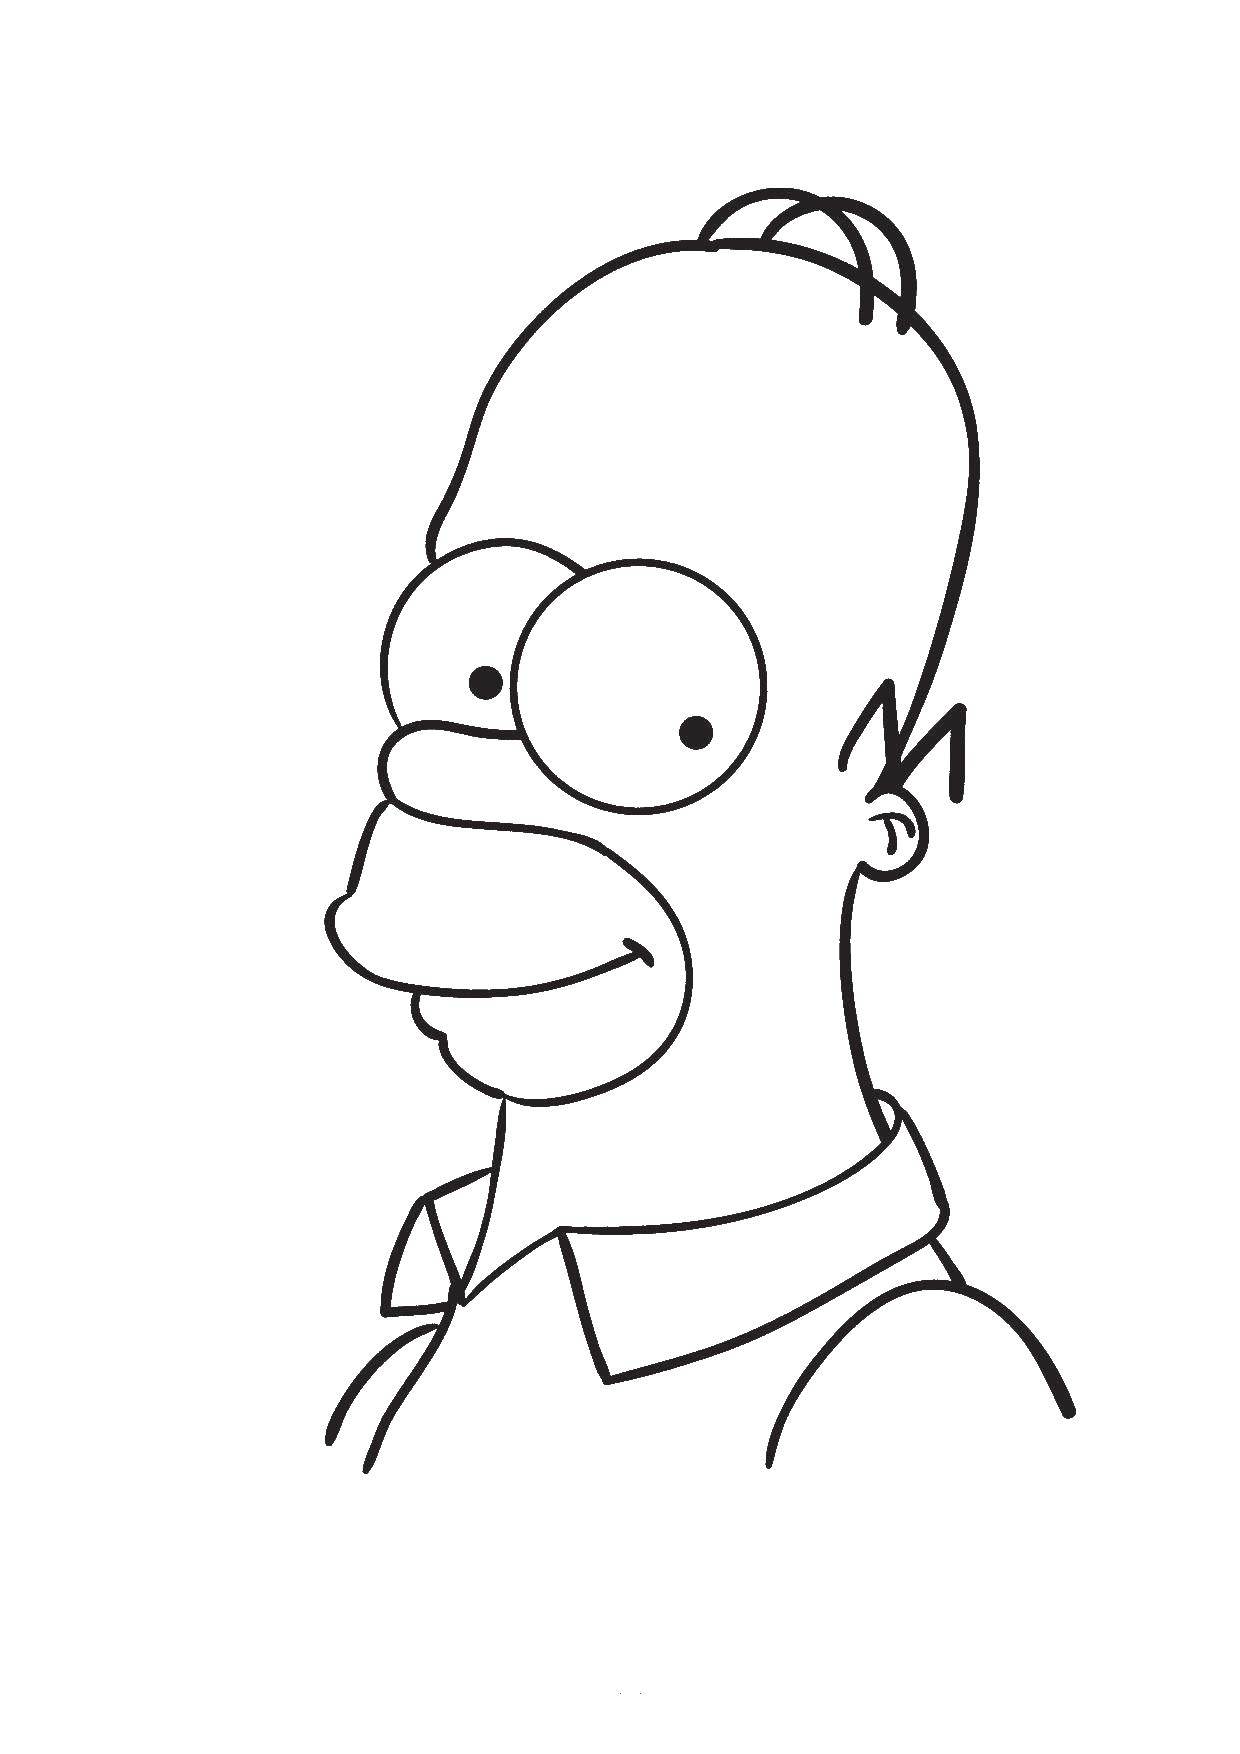 Online coloring pages simpson coloring page homer simpson cartoons